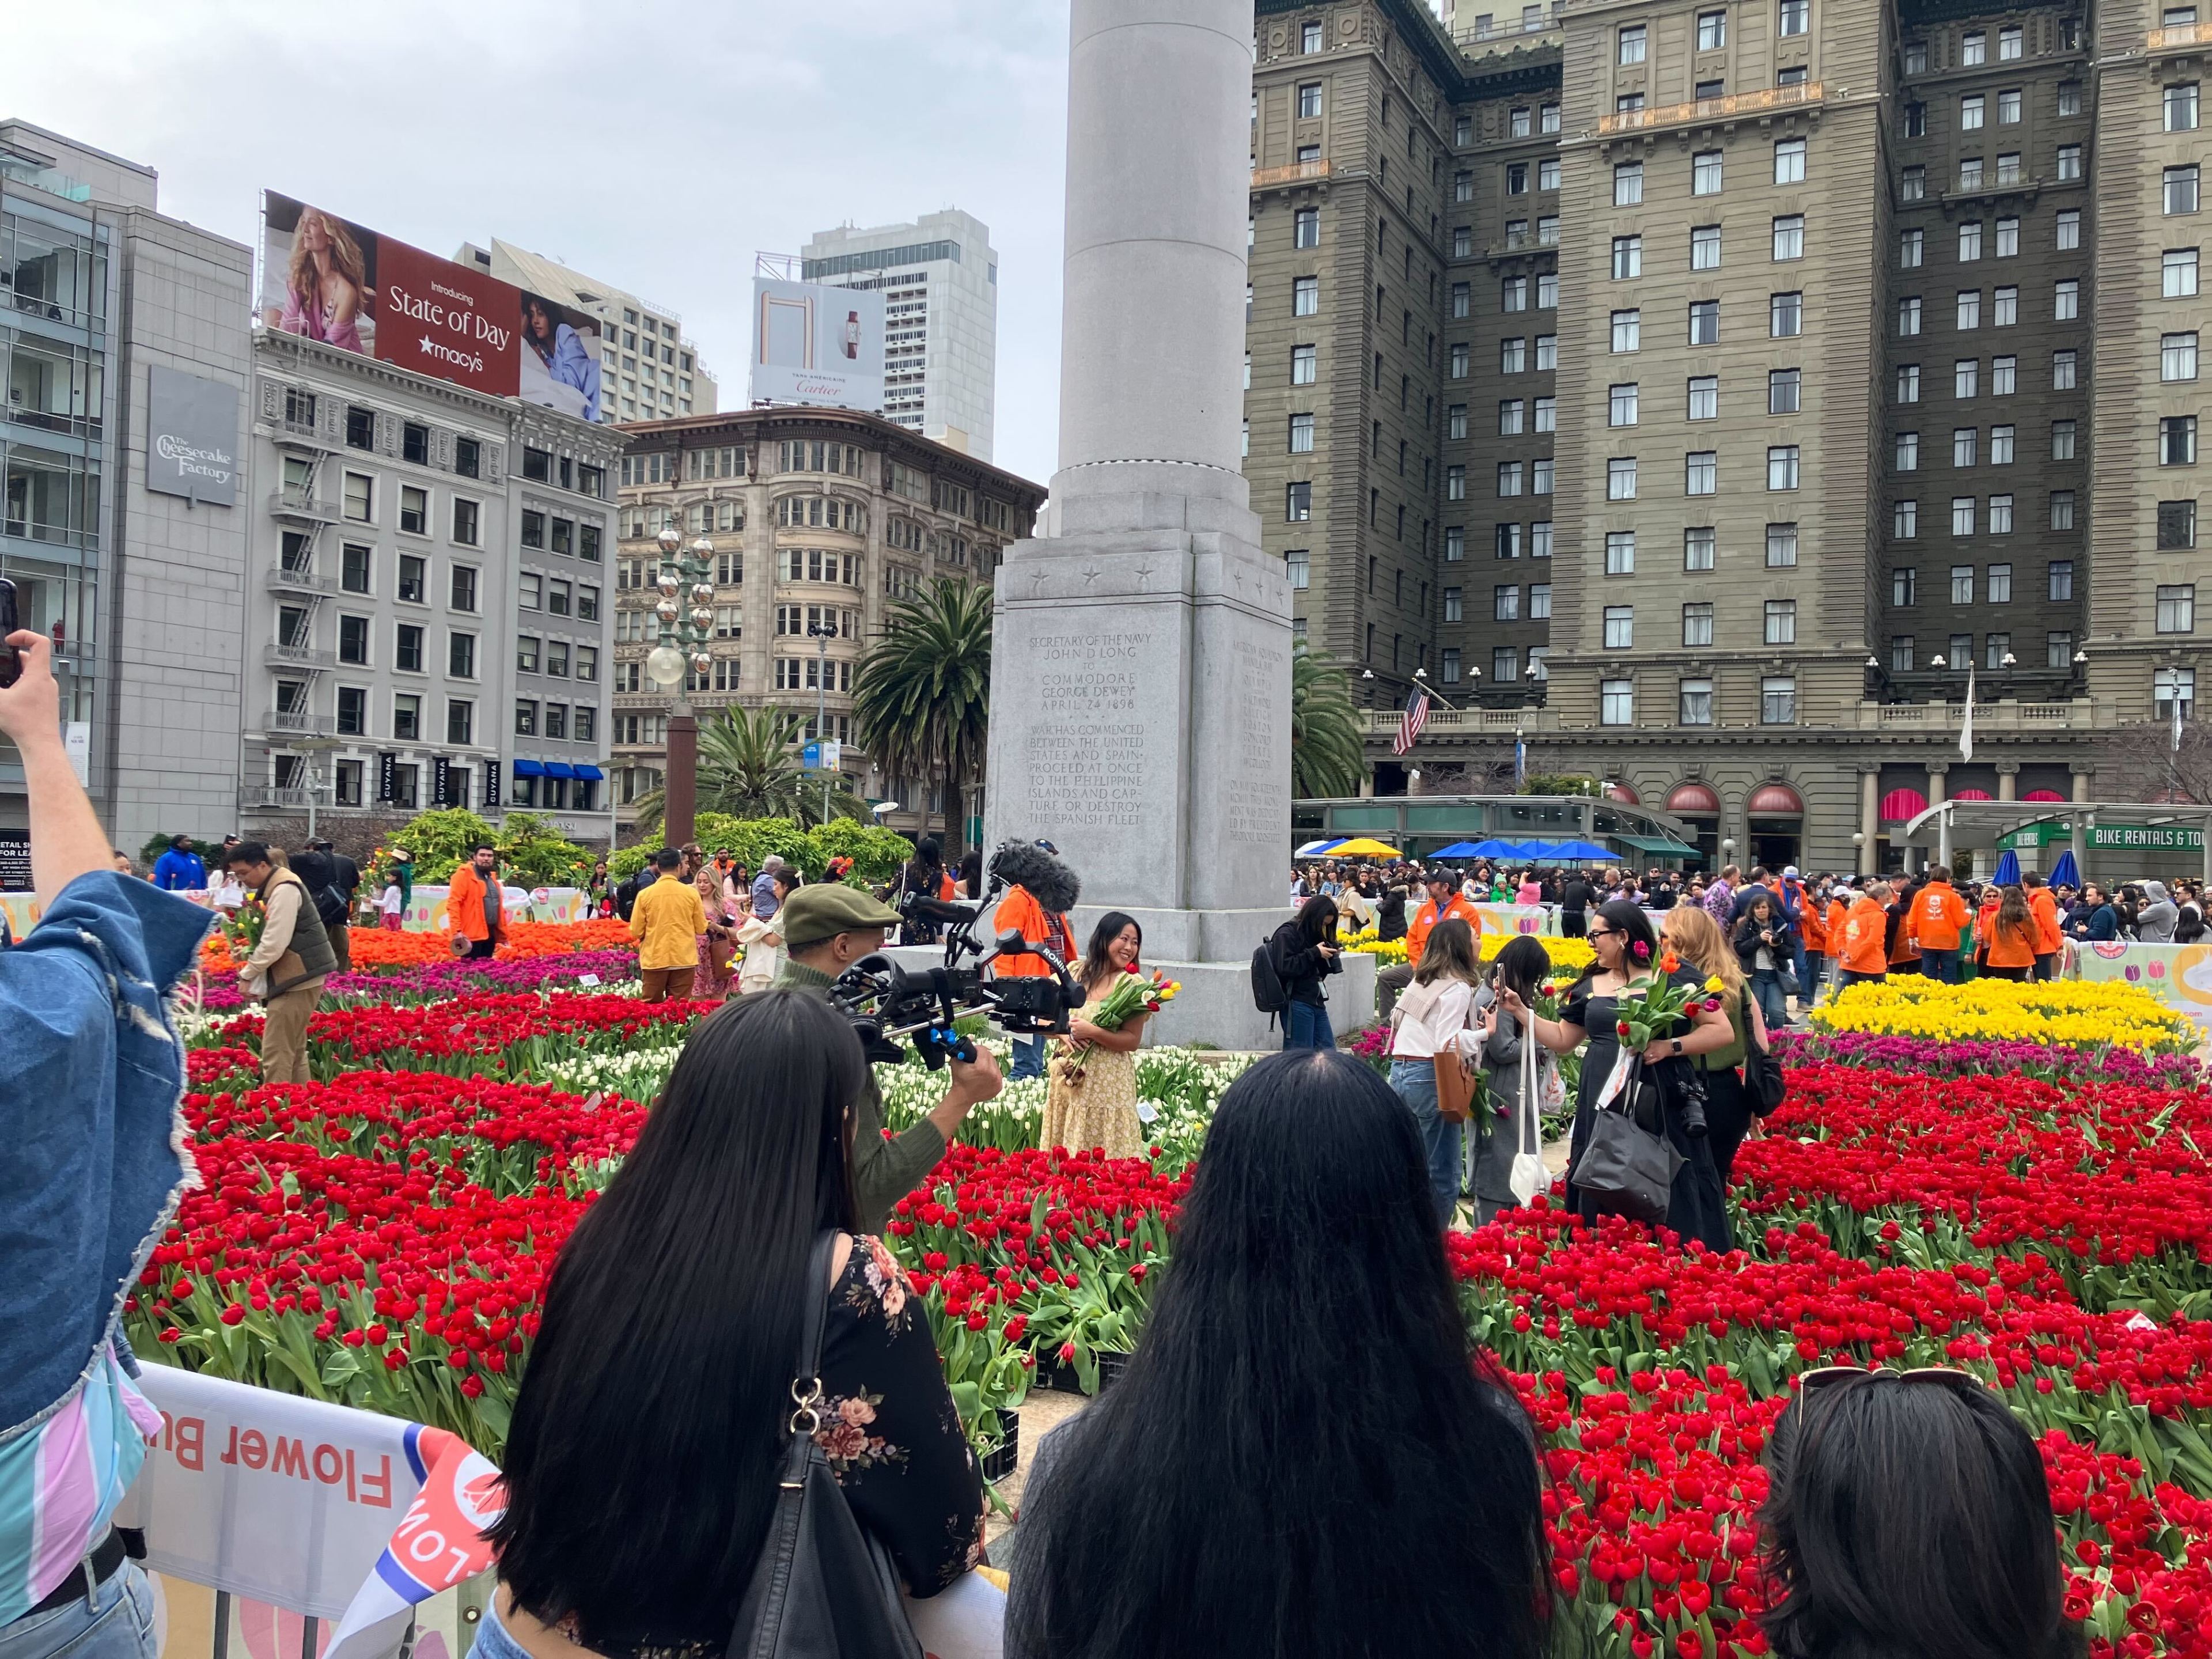 A bustling urban park with vibrant tulips and a crowd of people around a central monument, flanked by tall buildings.